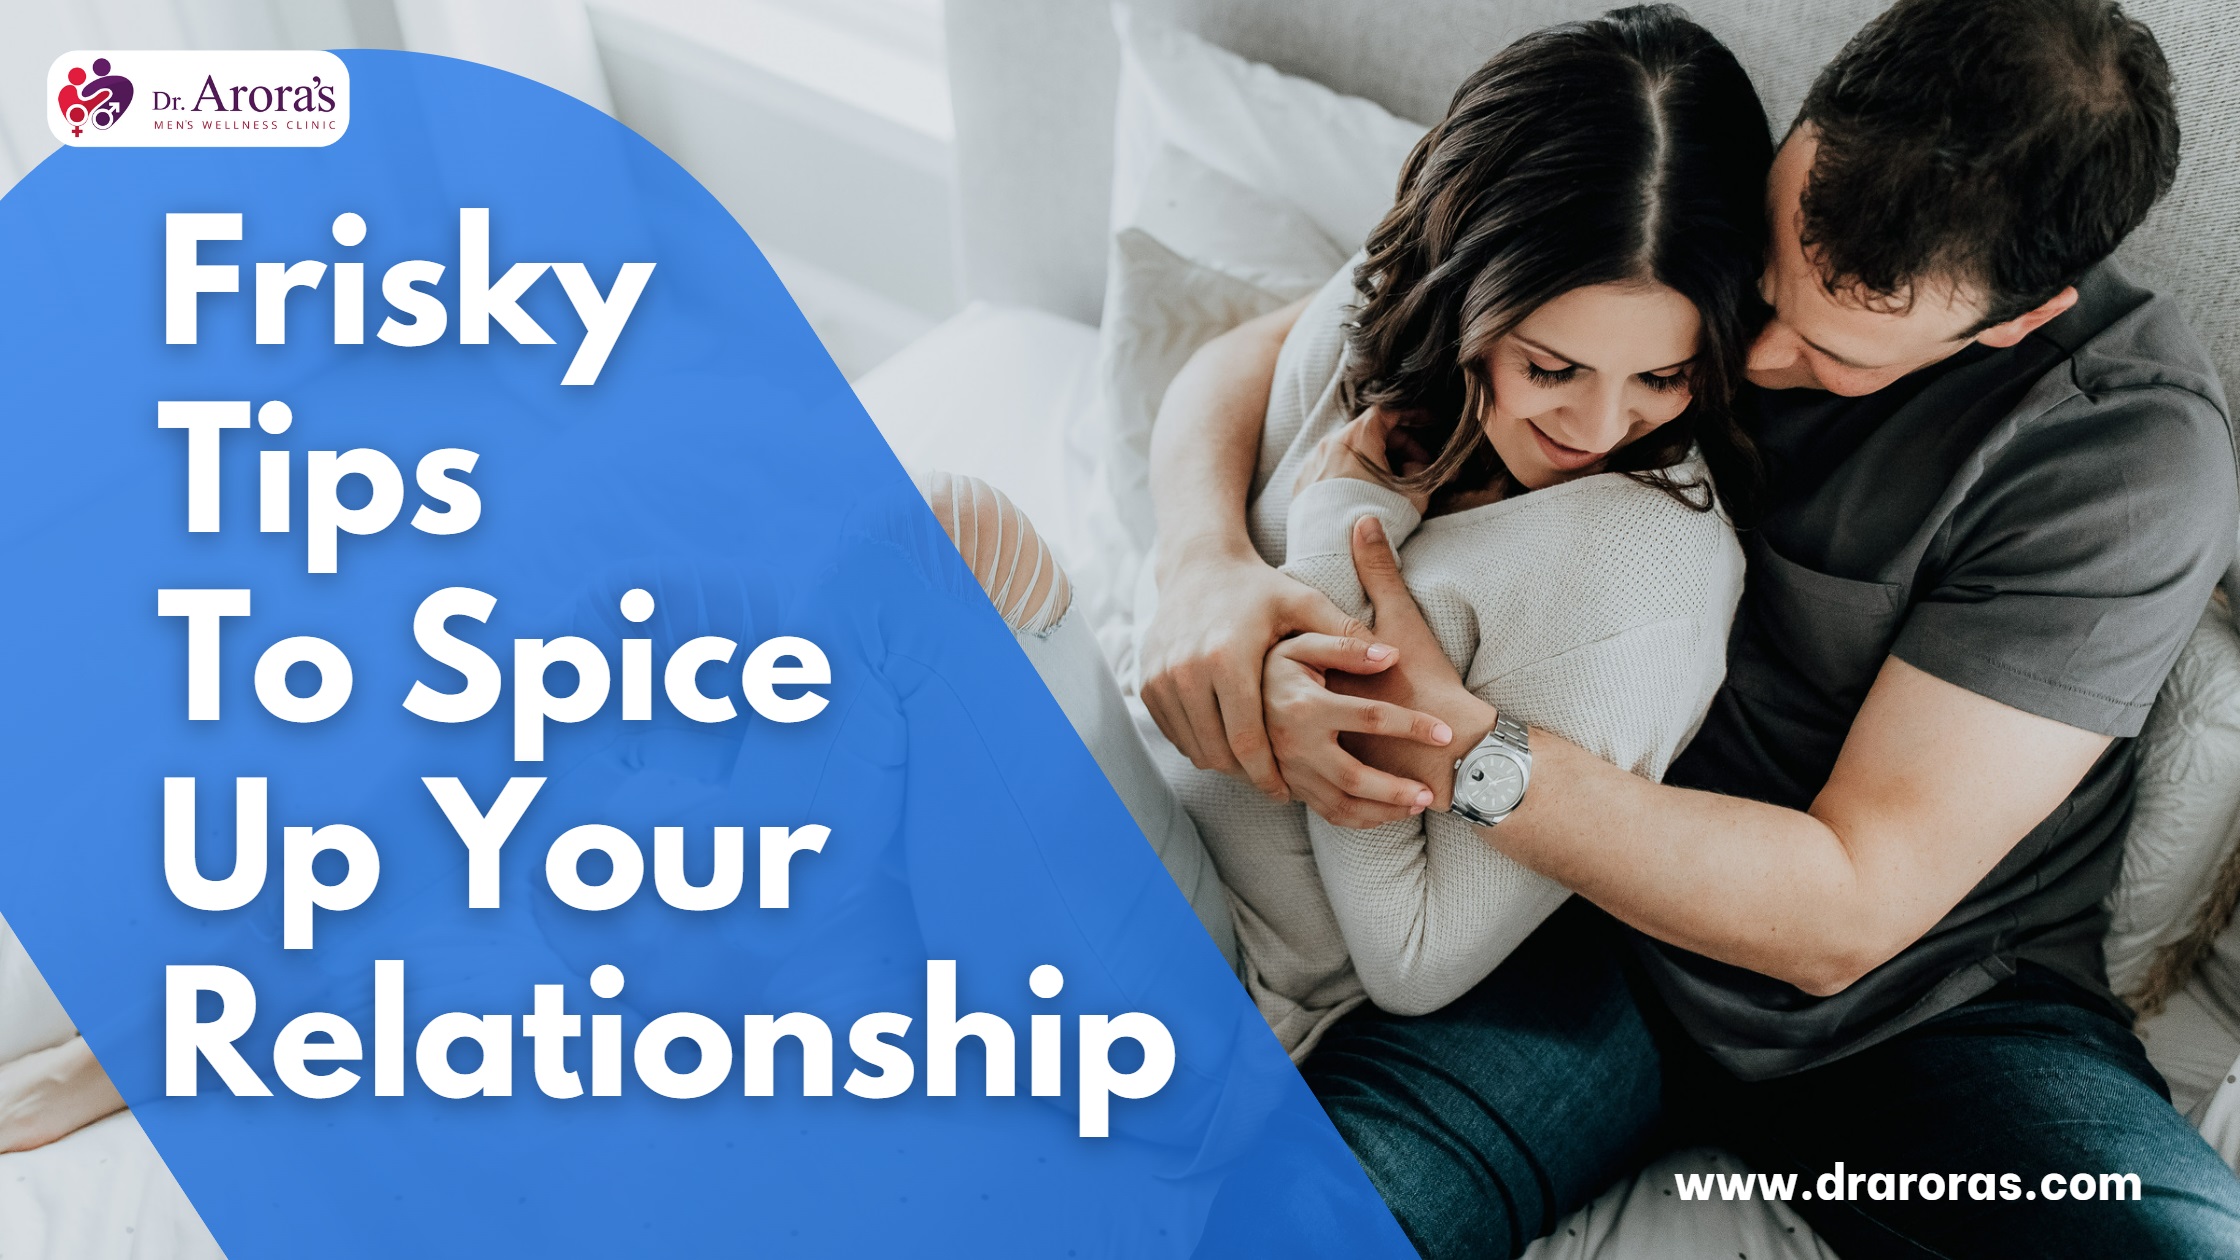 10 Fun, Frisky Ways To Spice Up Your Relationship